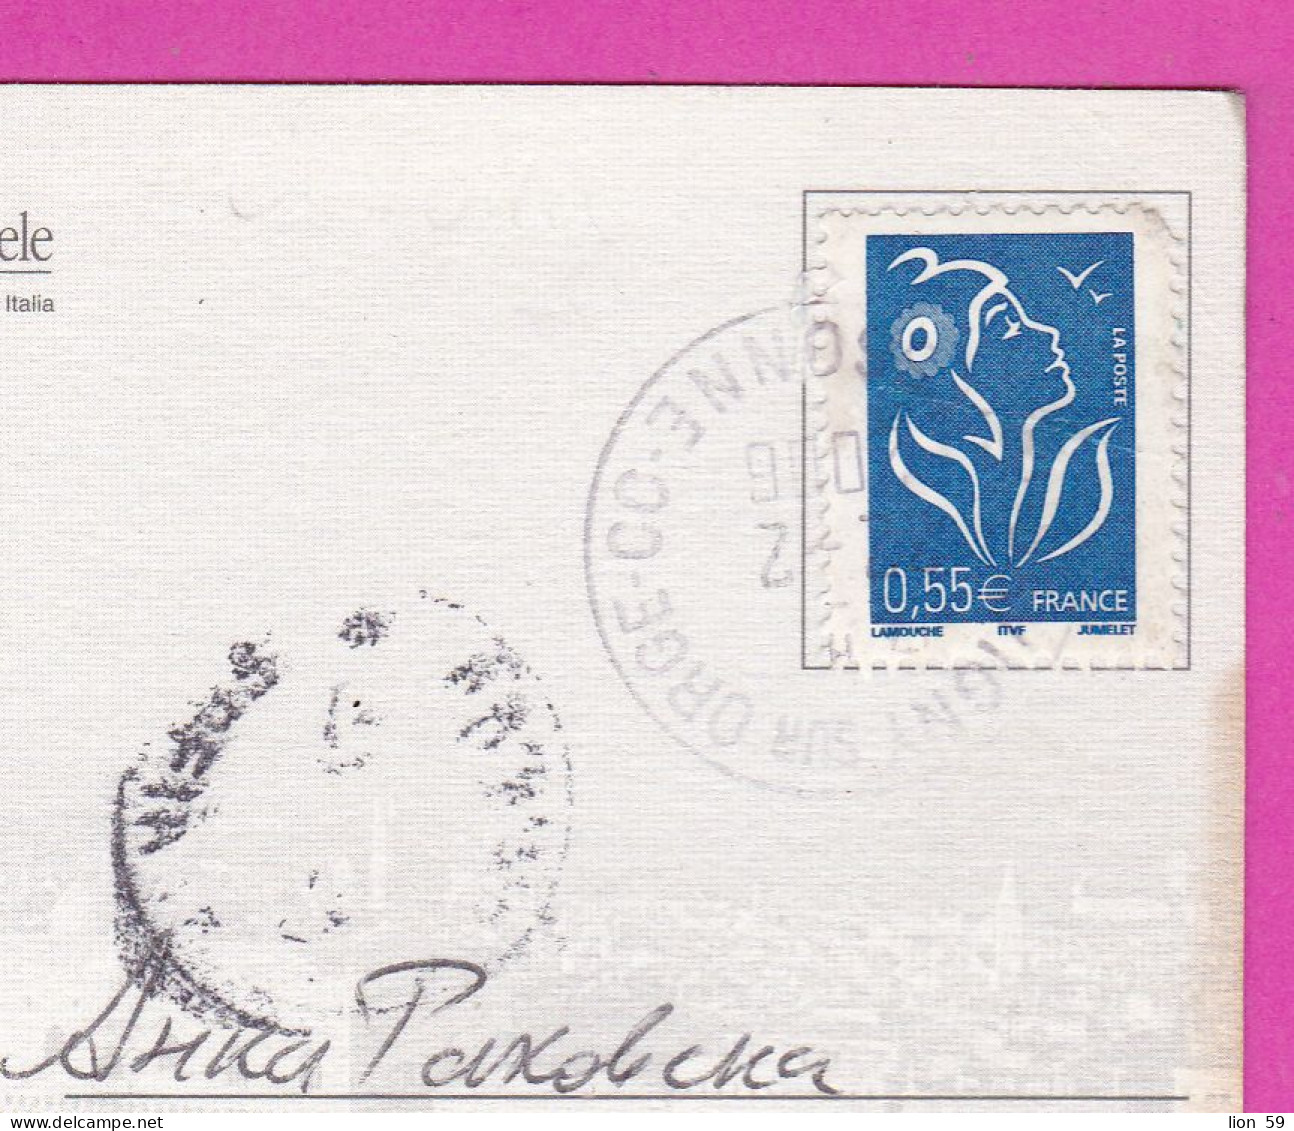 294122 / France - VENEZIA (Italy)  PC 2006 Brétigny-sur-Orge USED  0.55 € - Marianne Of Lamouche , Frankreich Francia - Covers & Documents